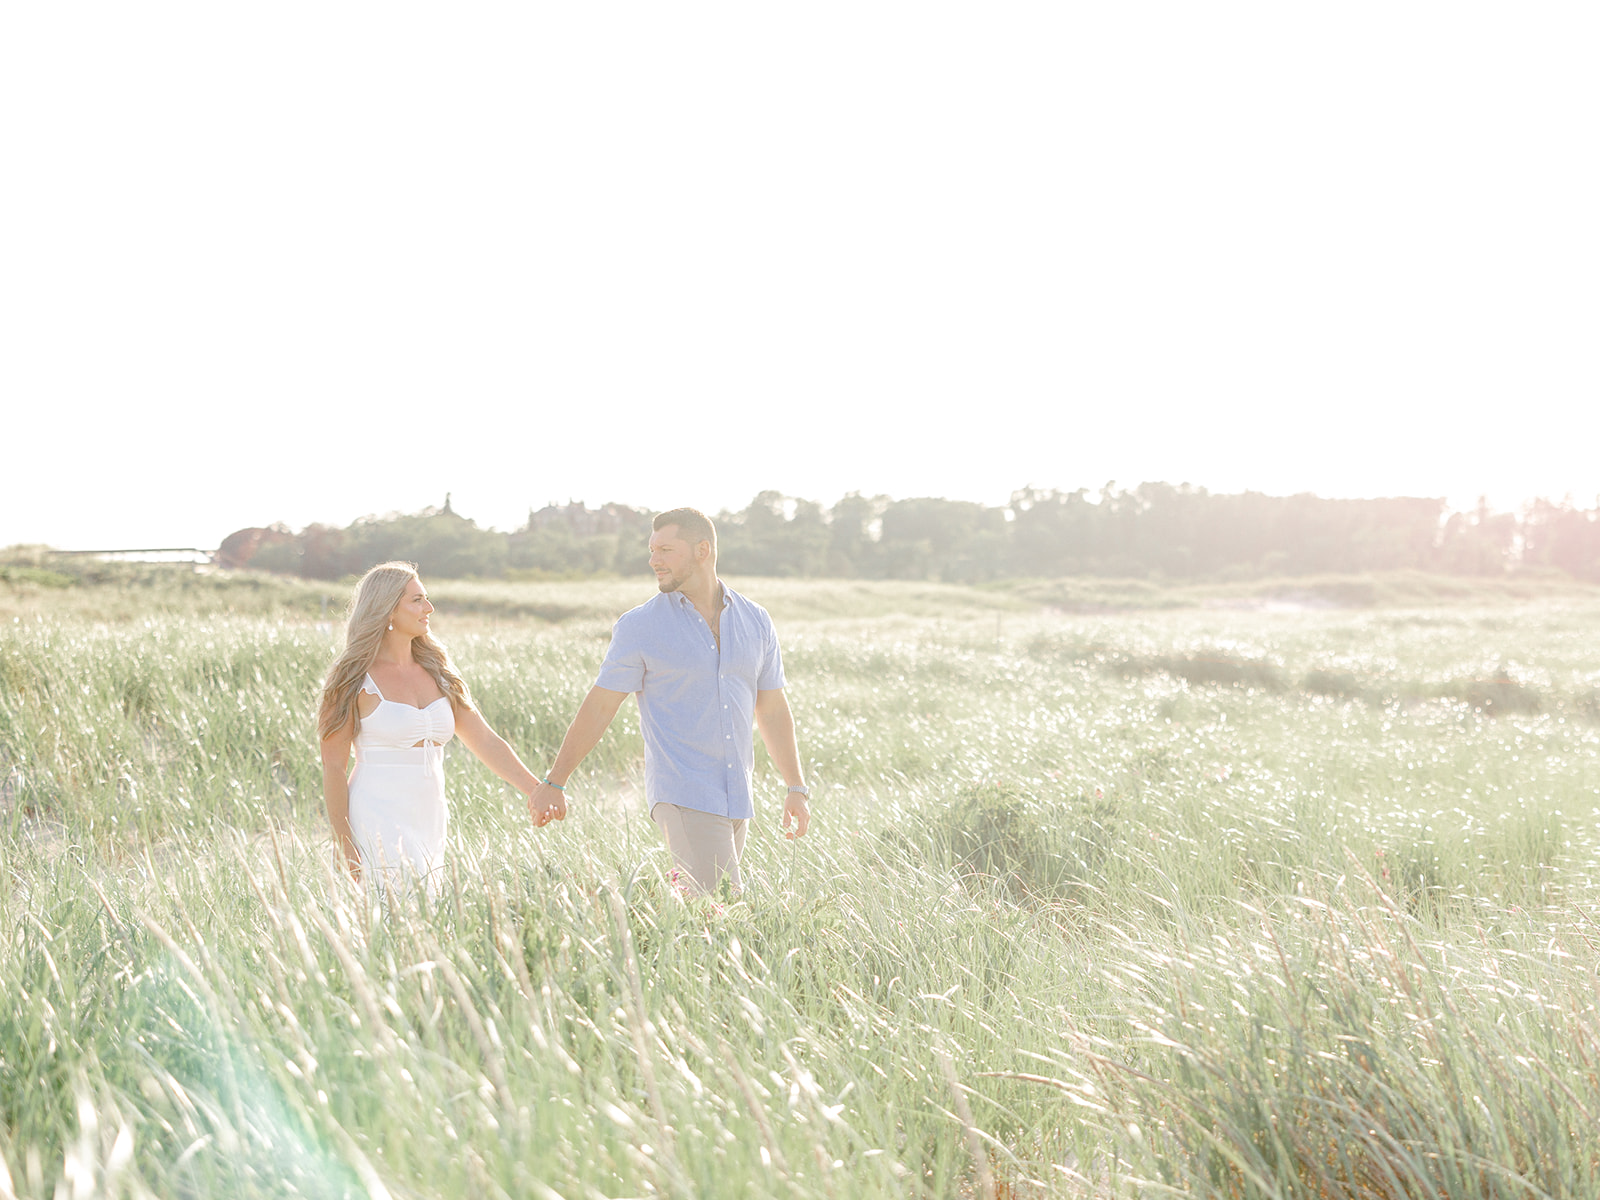 Bride and groom walk through grass on their way to Crane Beach in Ipswich, MA on the North Shore.